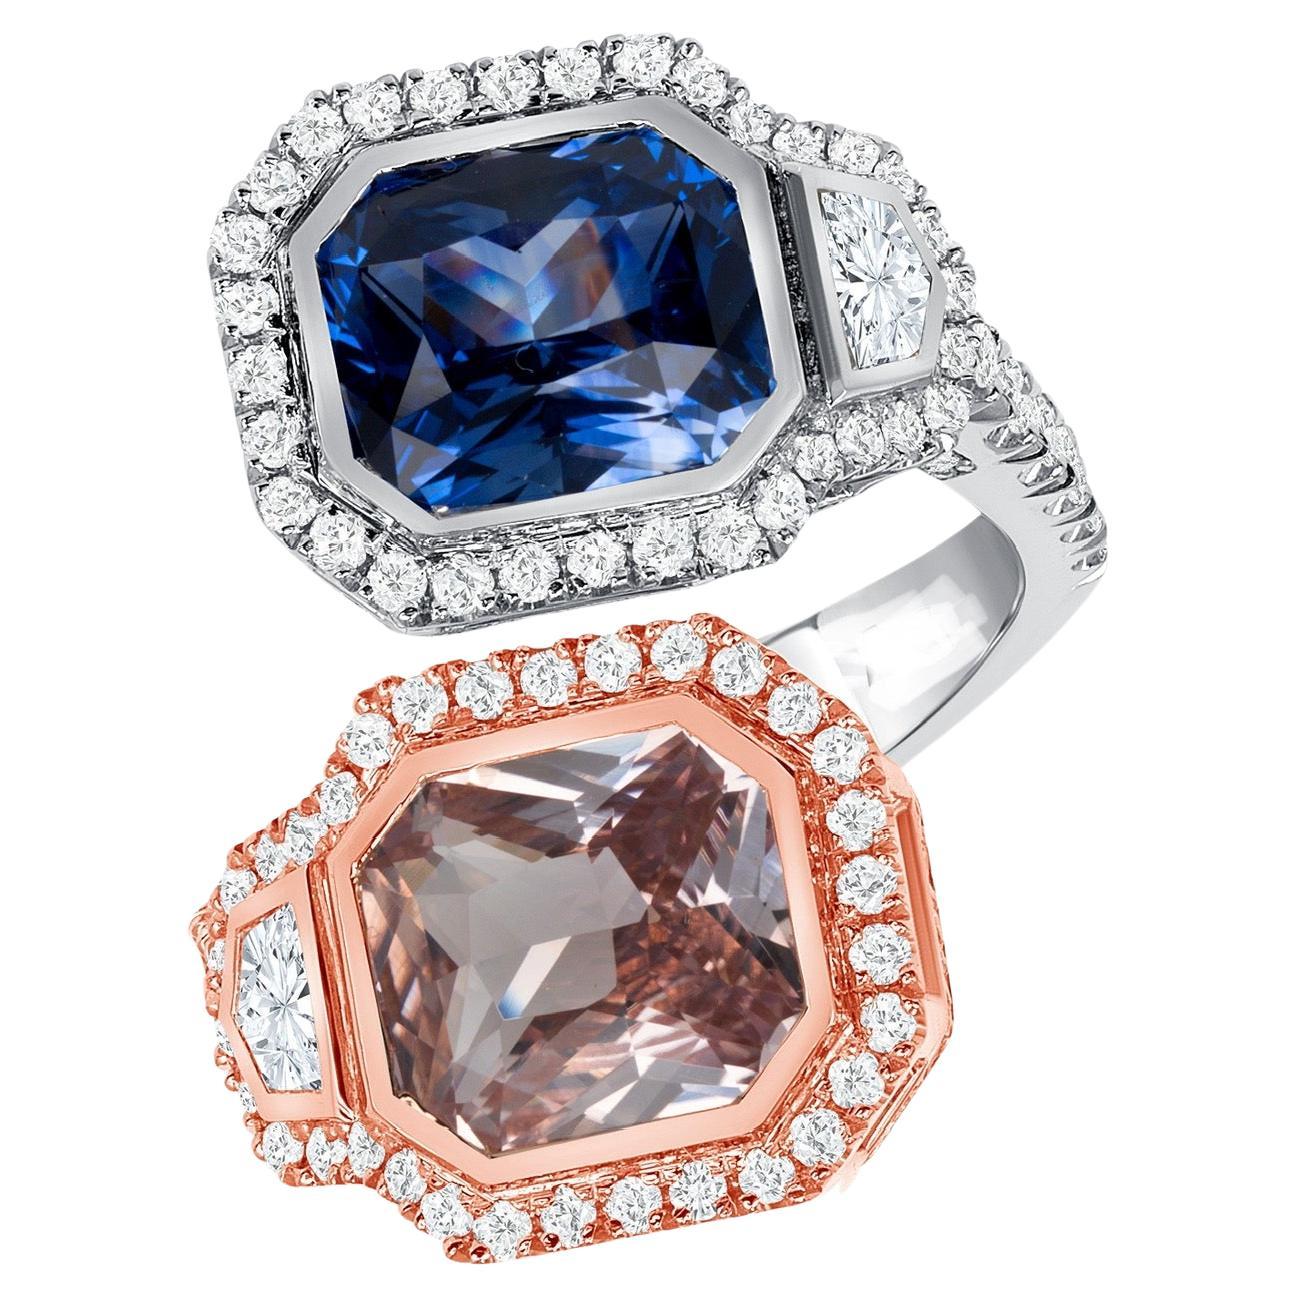 3.05ct Pink Sapphire and 3.38ct Blue Sapphire, radiant-cut  bypass ring.